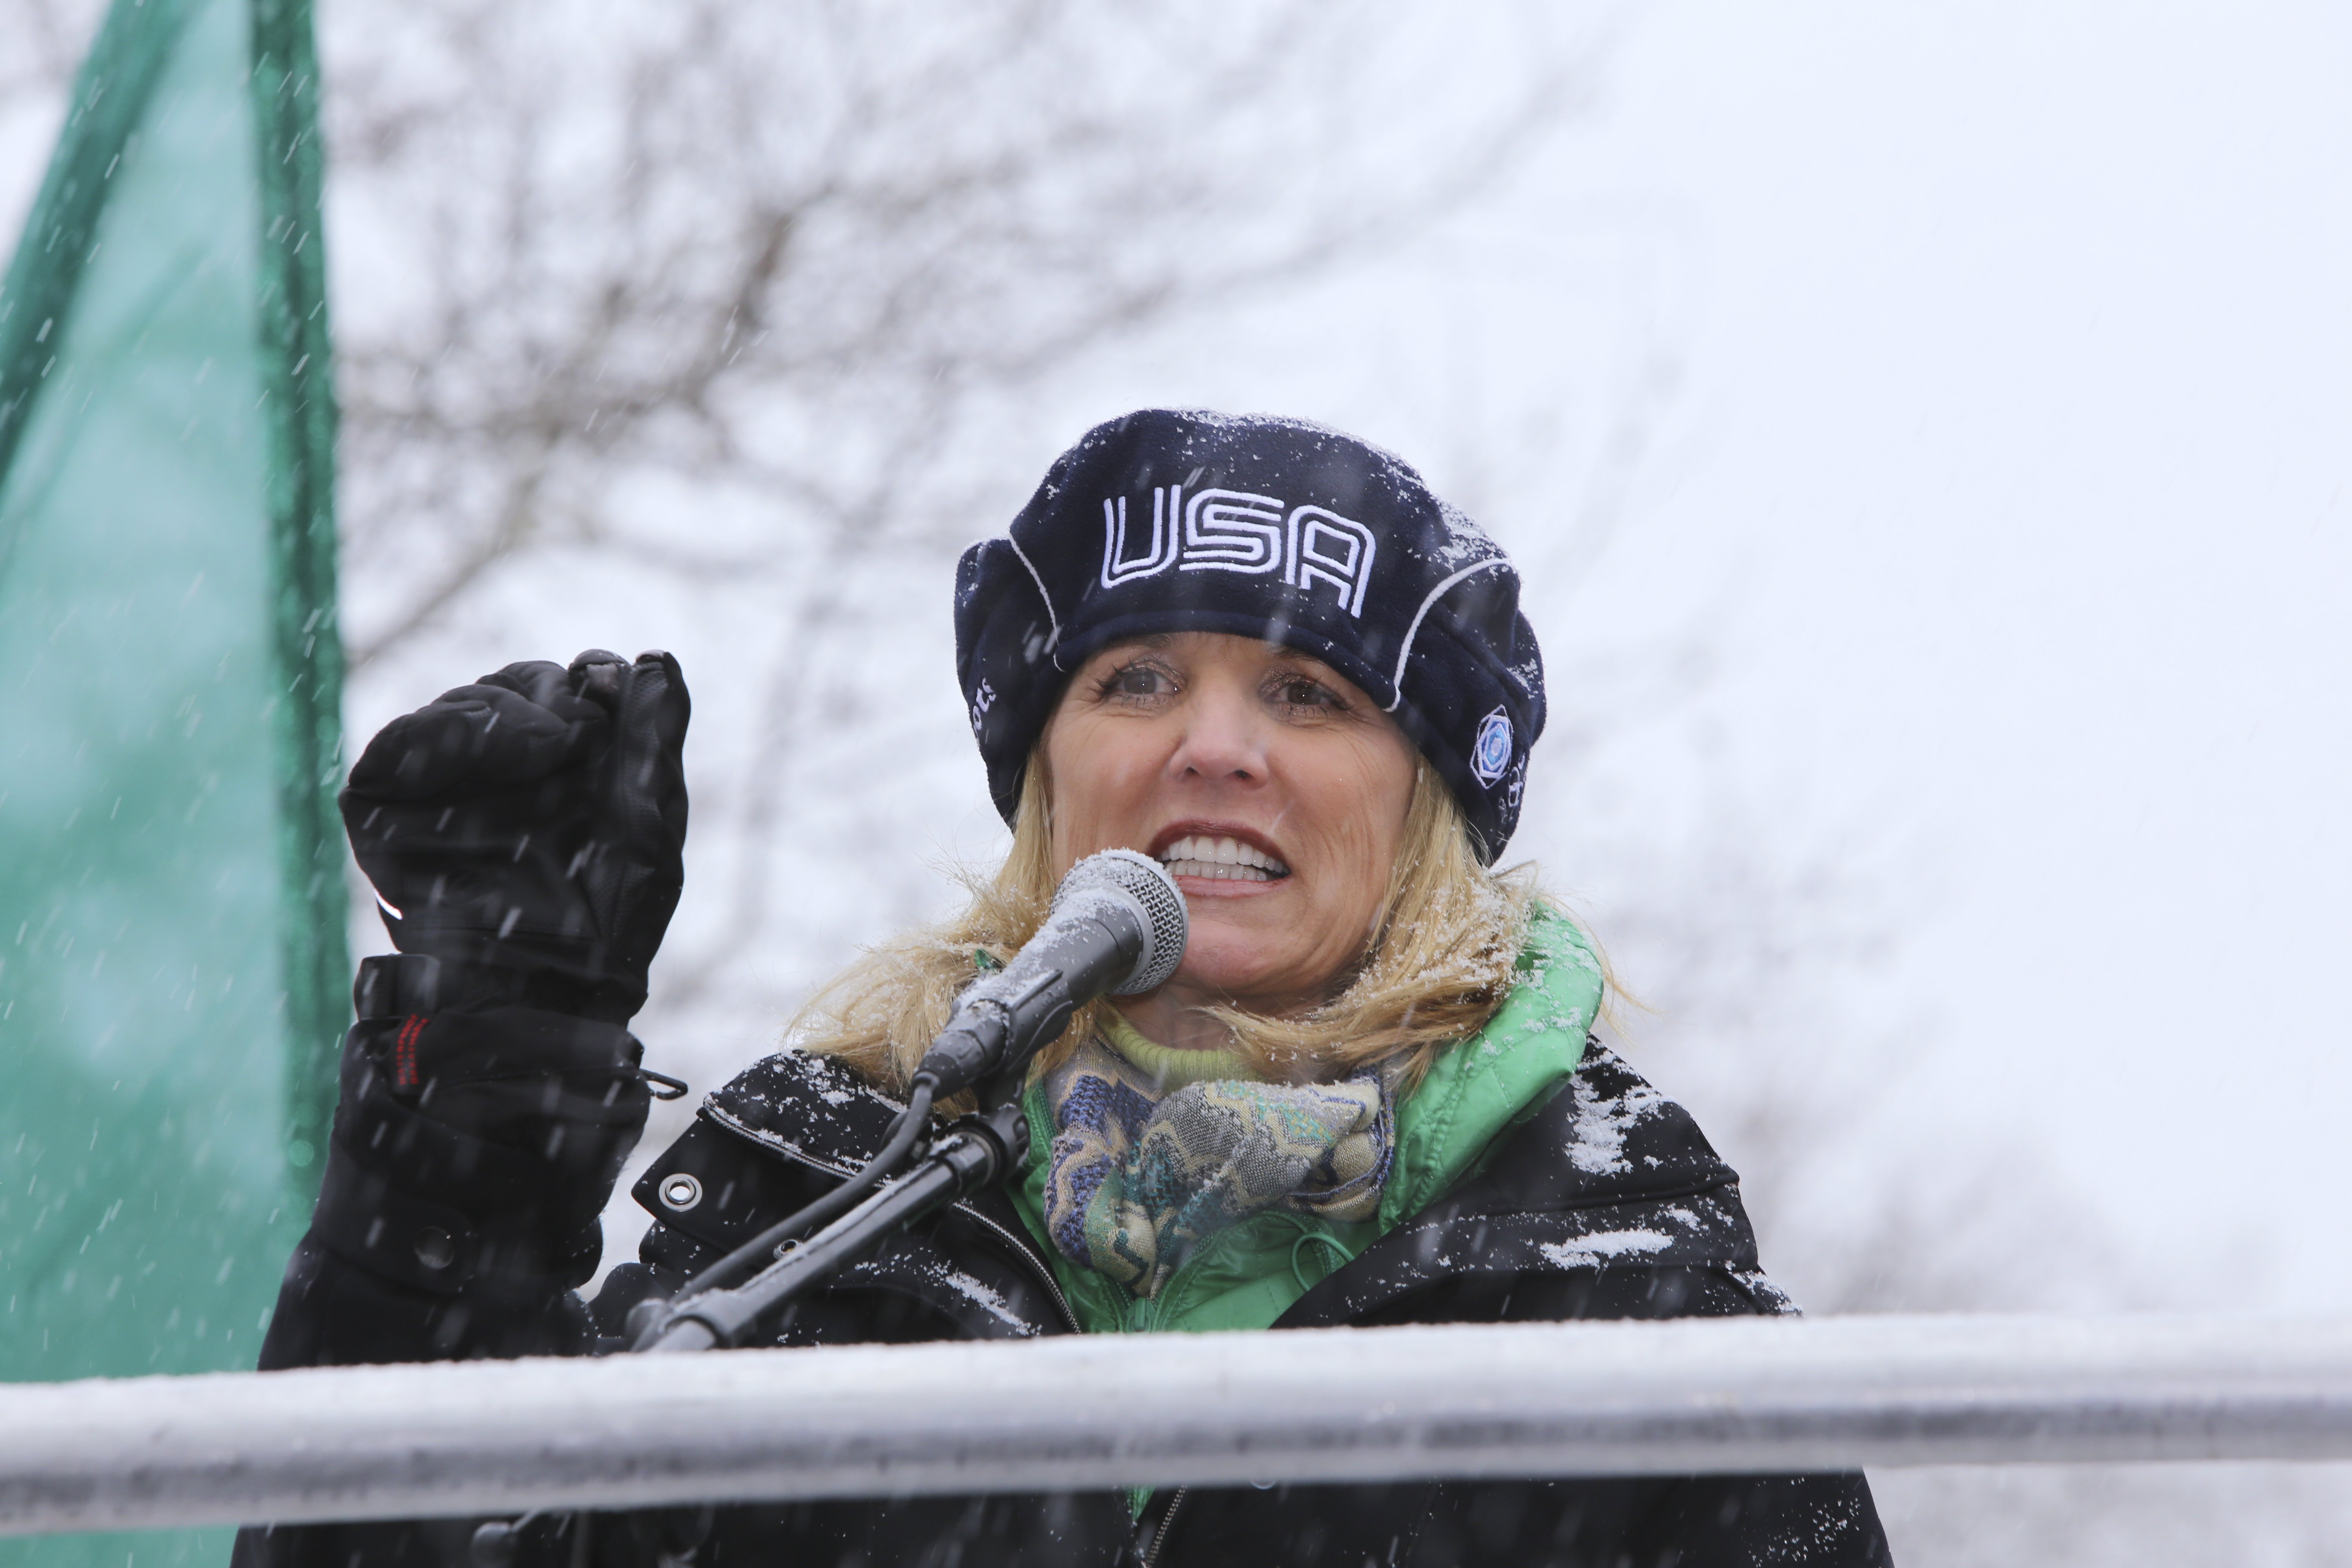 Kerry Kennedy at the 15th annual St. Pat's For All parade that took place in driving snow in Sunnyside, Queens, on March 1, 2015 in New York City | Photo: Shutterstock